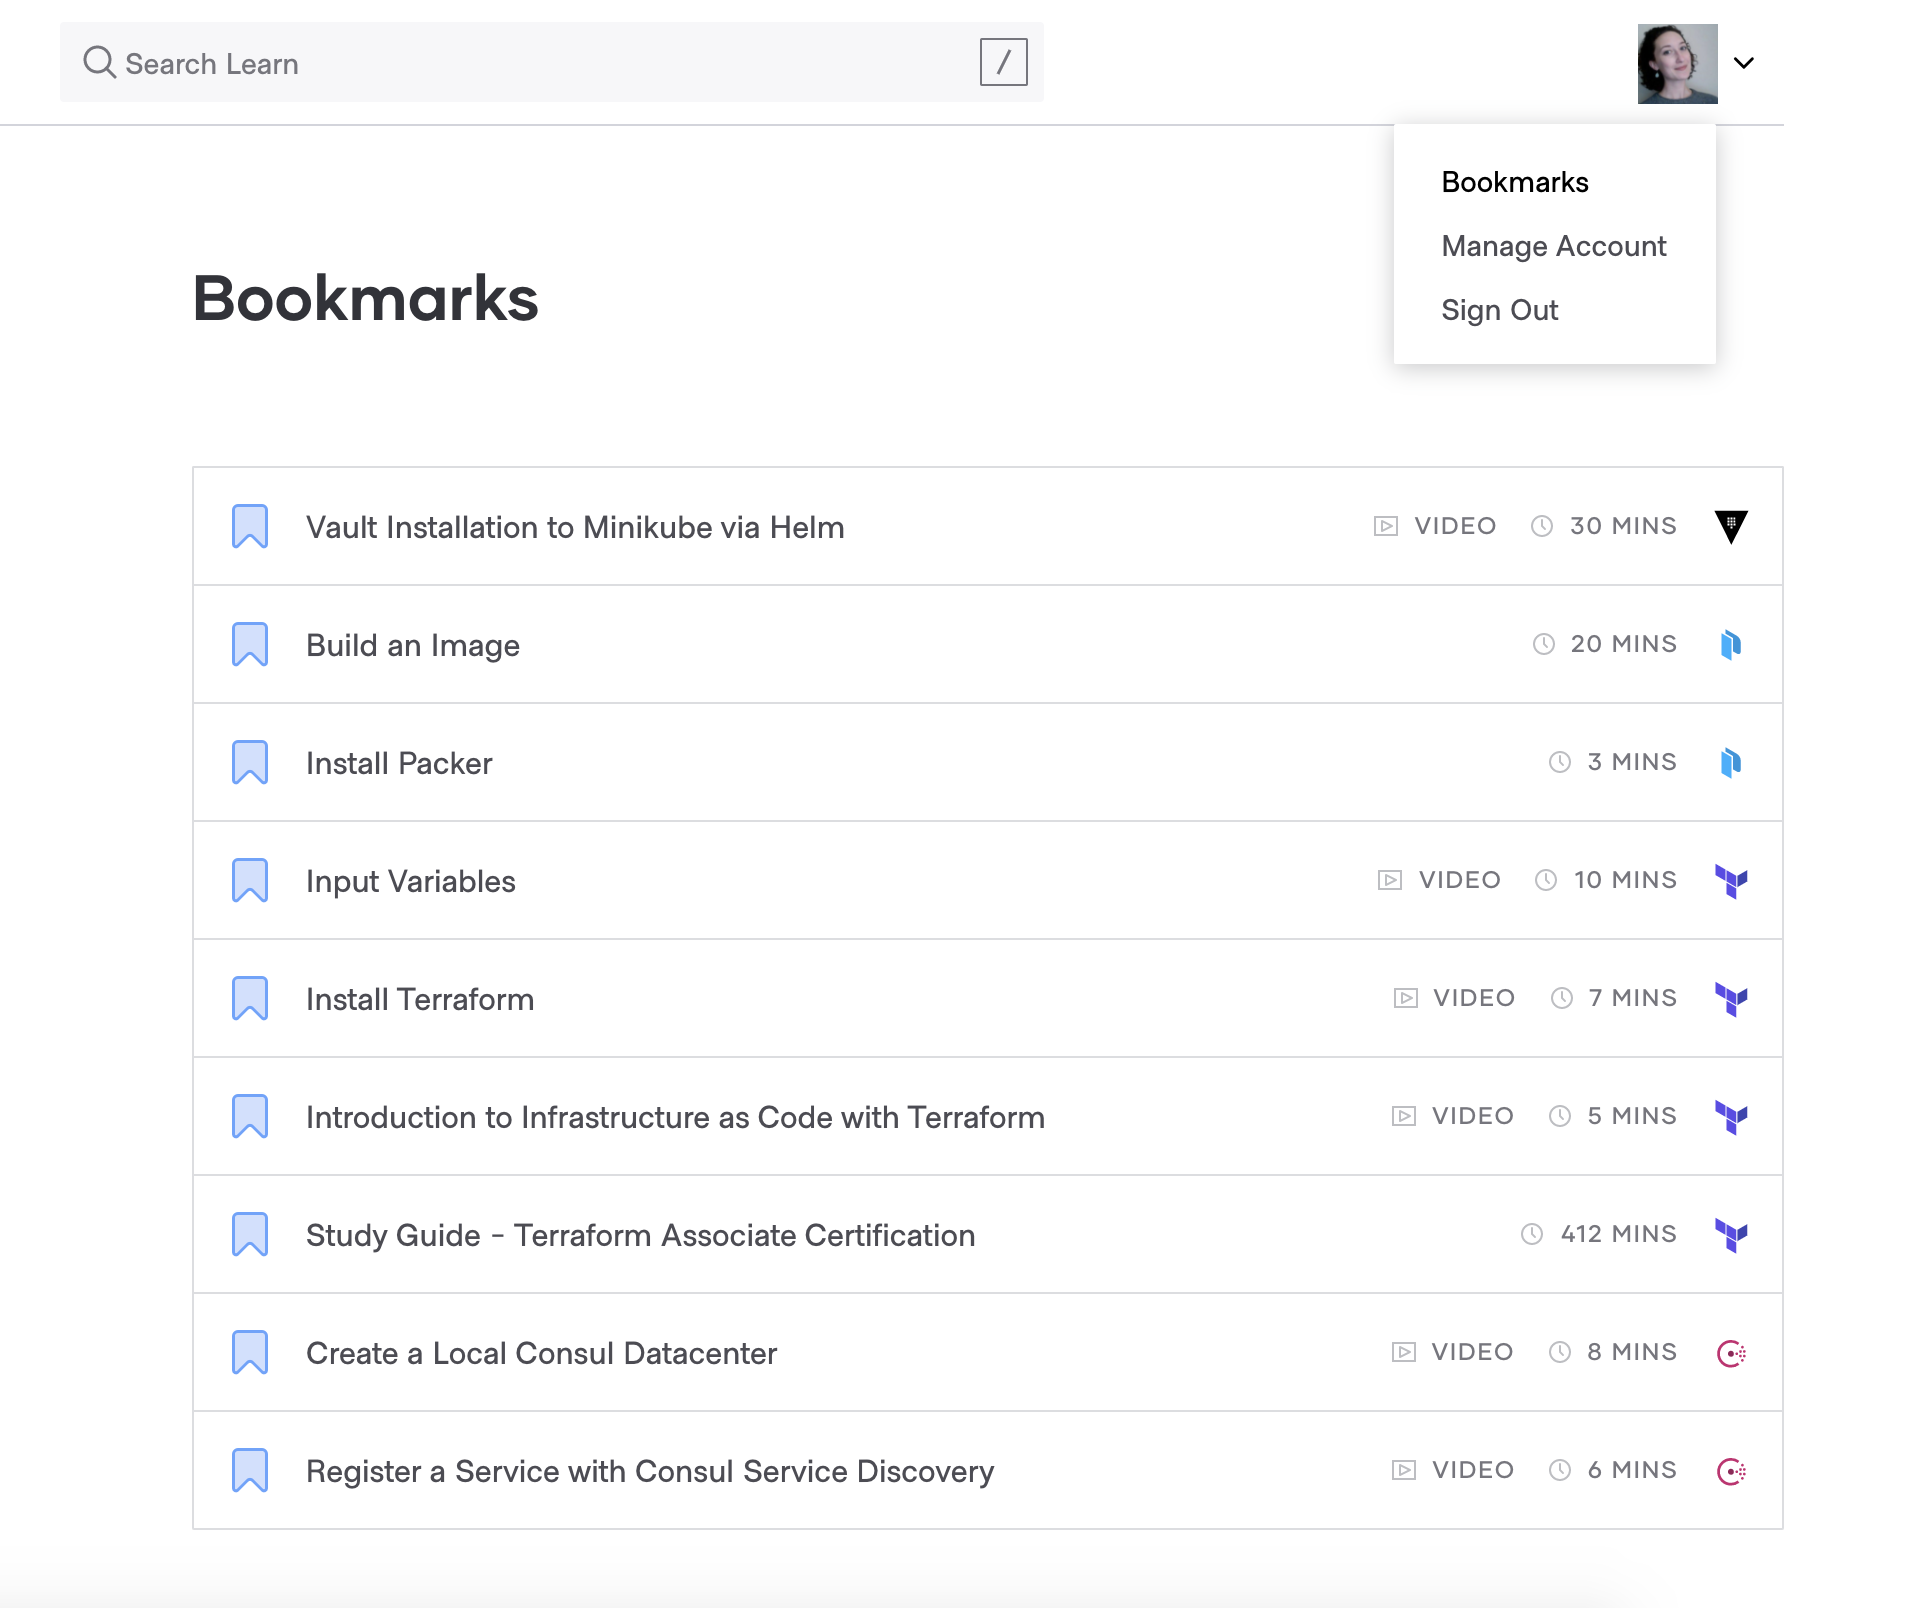 List view of saved bookmarks